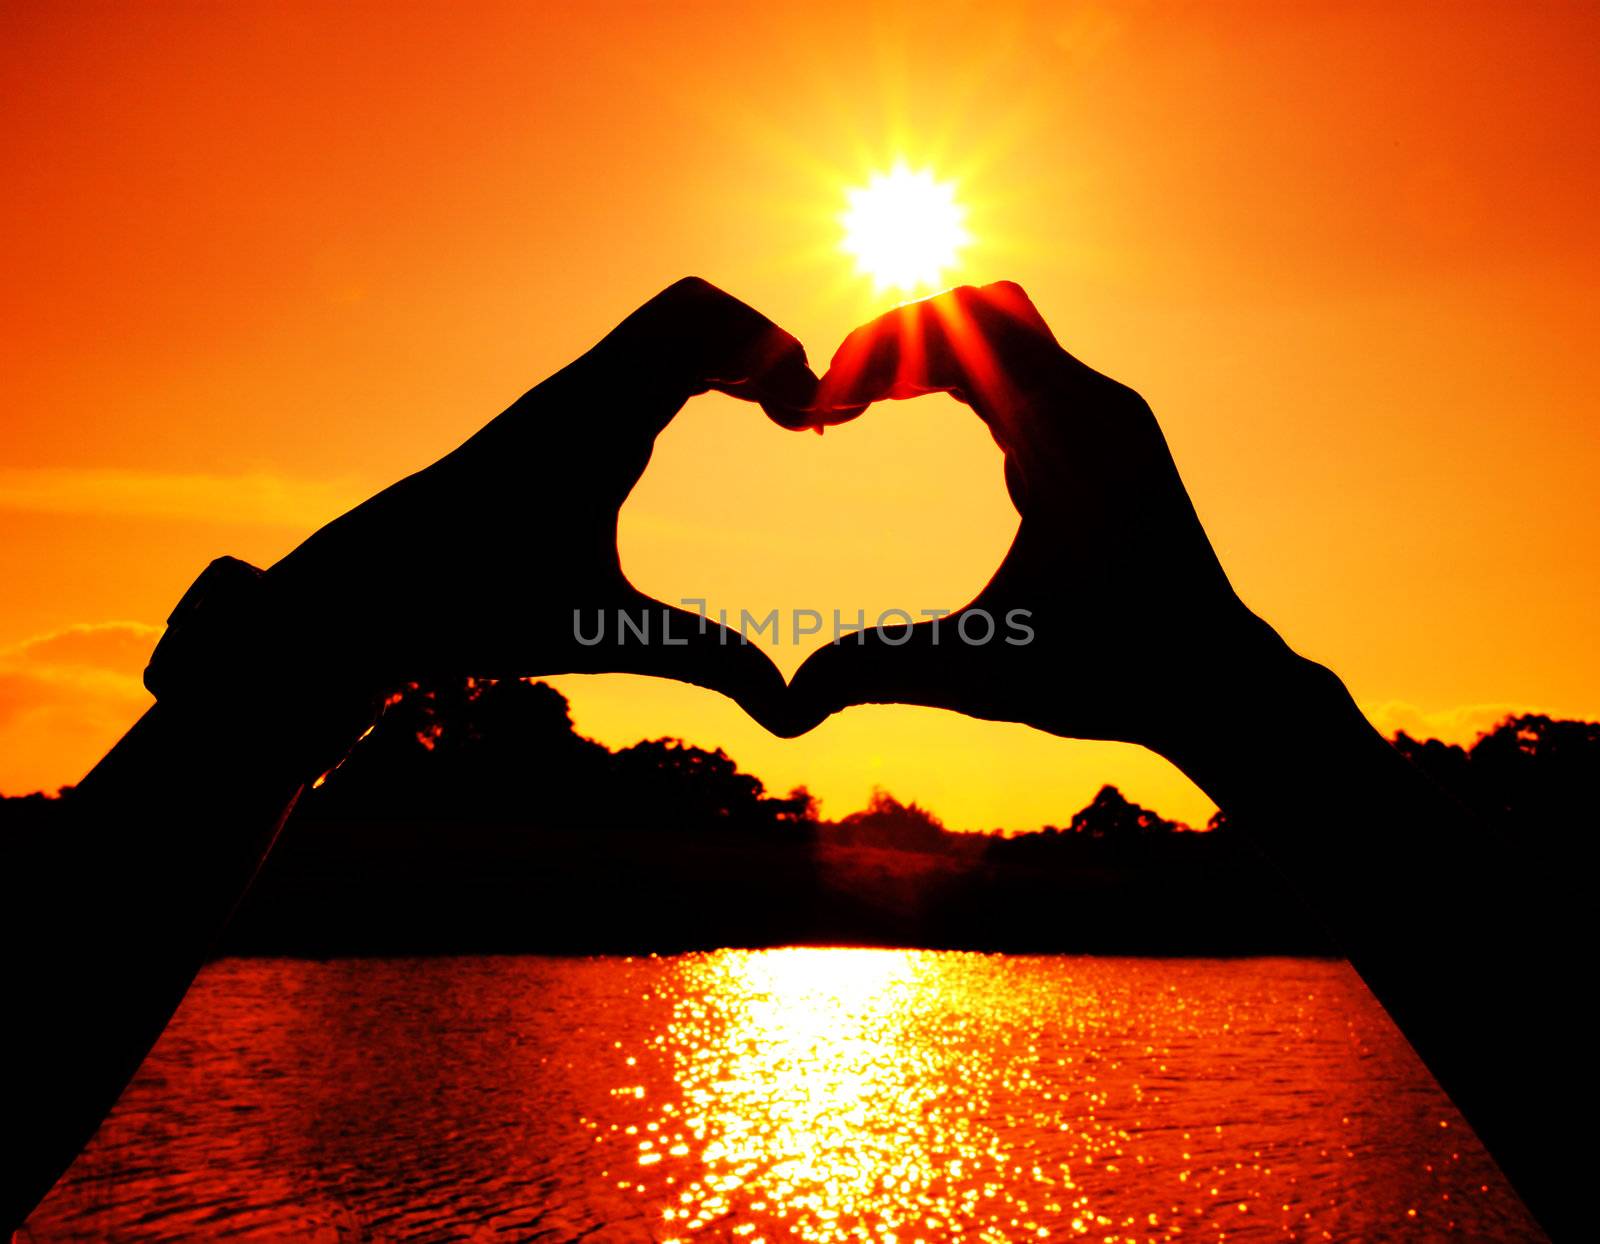 heart shape made with man and woman hands at the sun